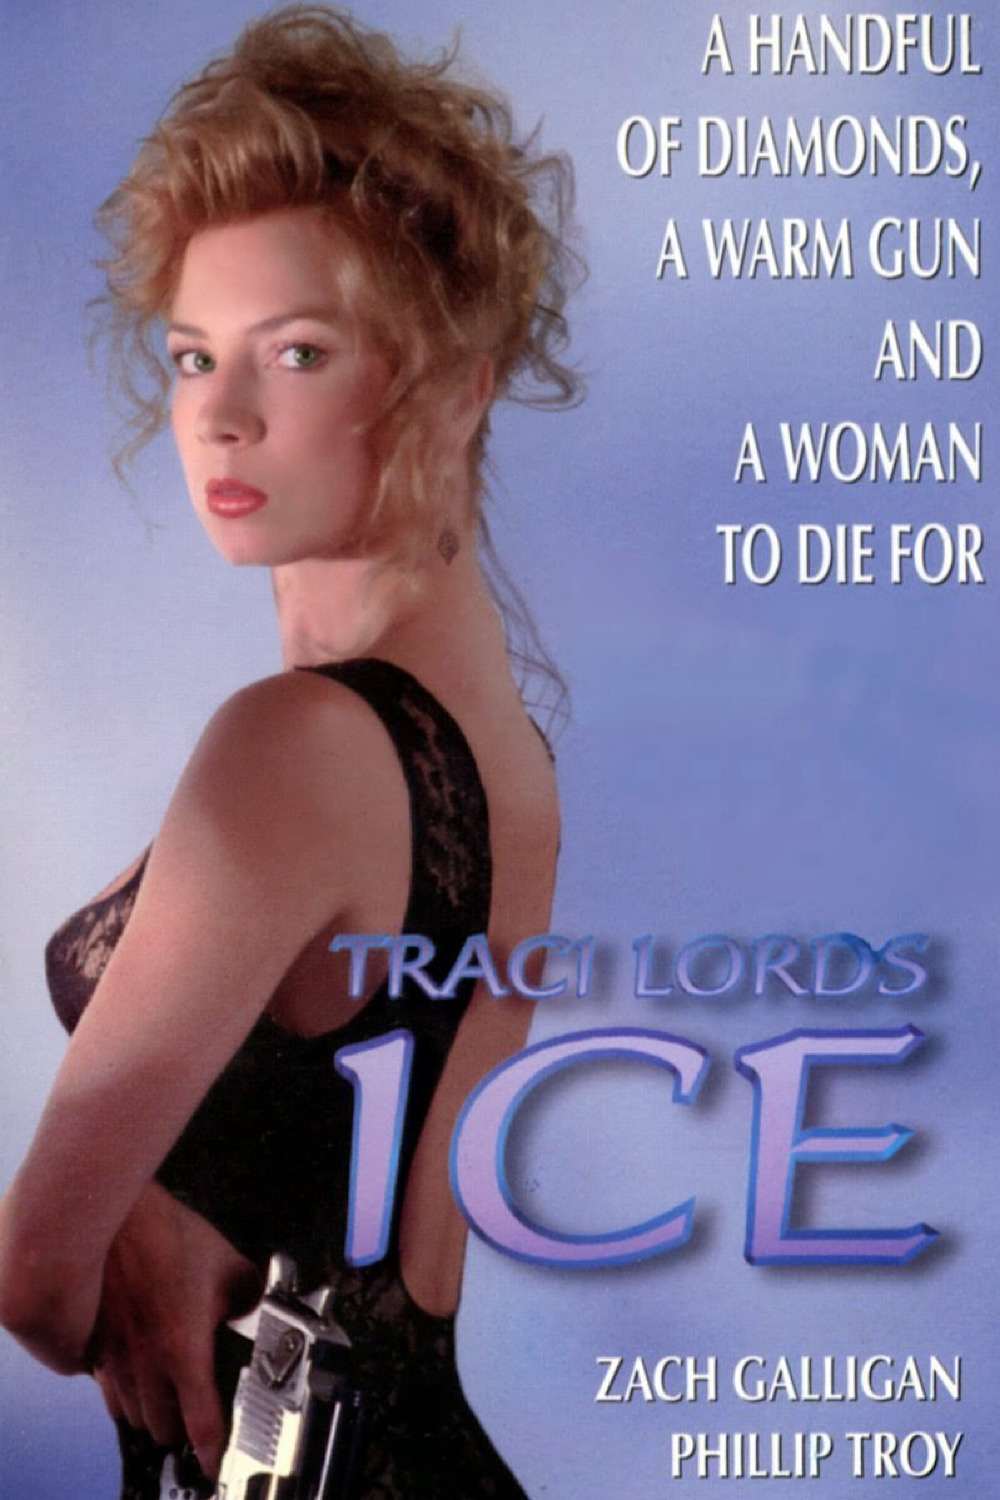 Ice (1994) starring Traci Lords on DVD on DVD